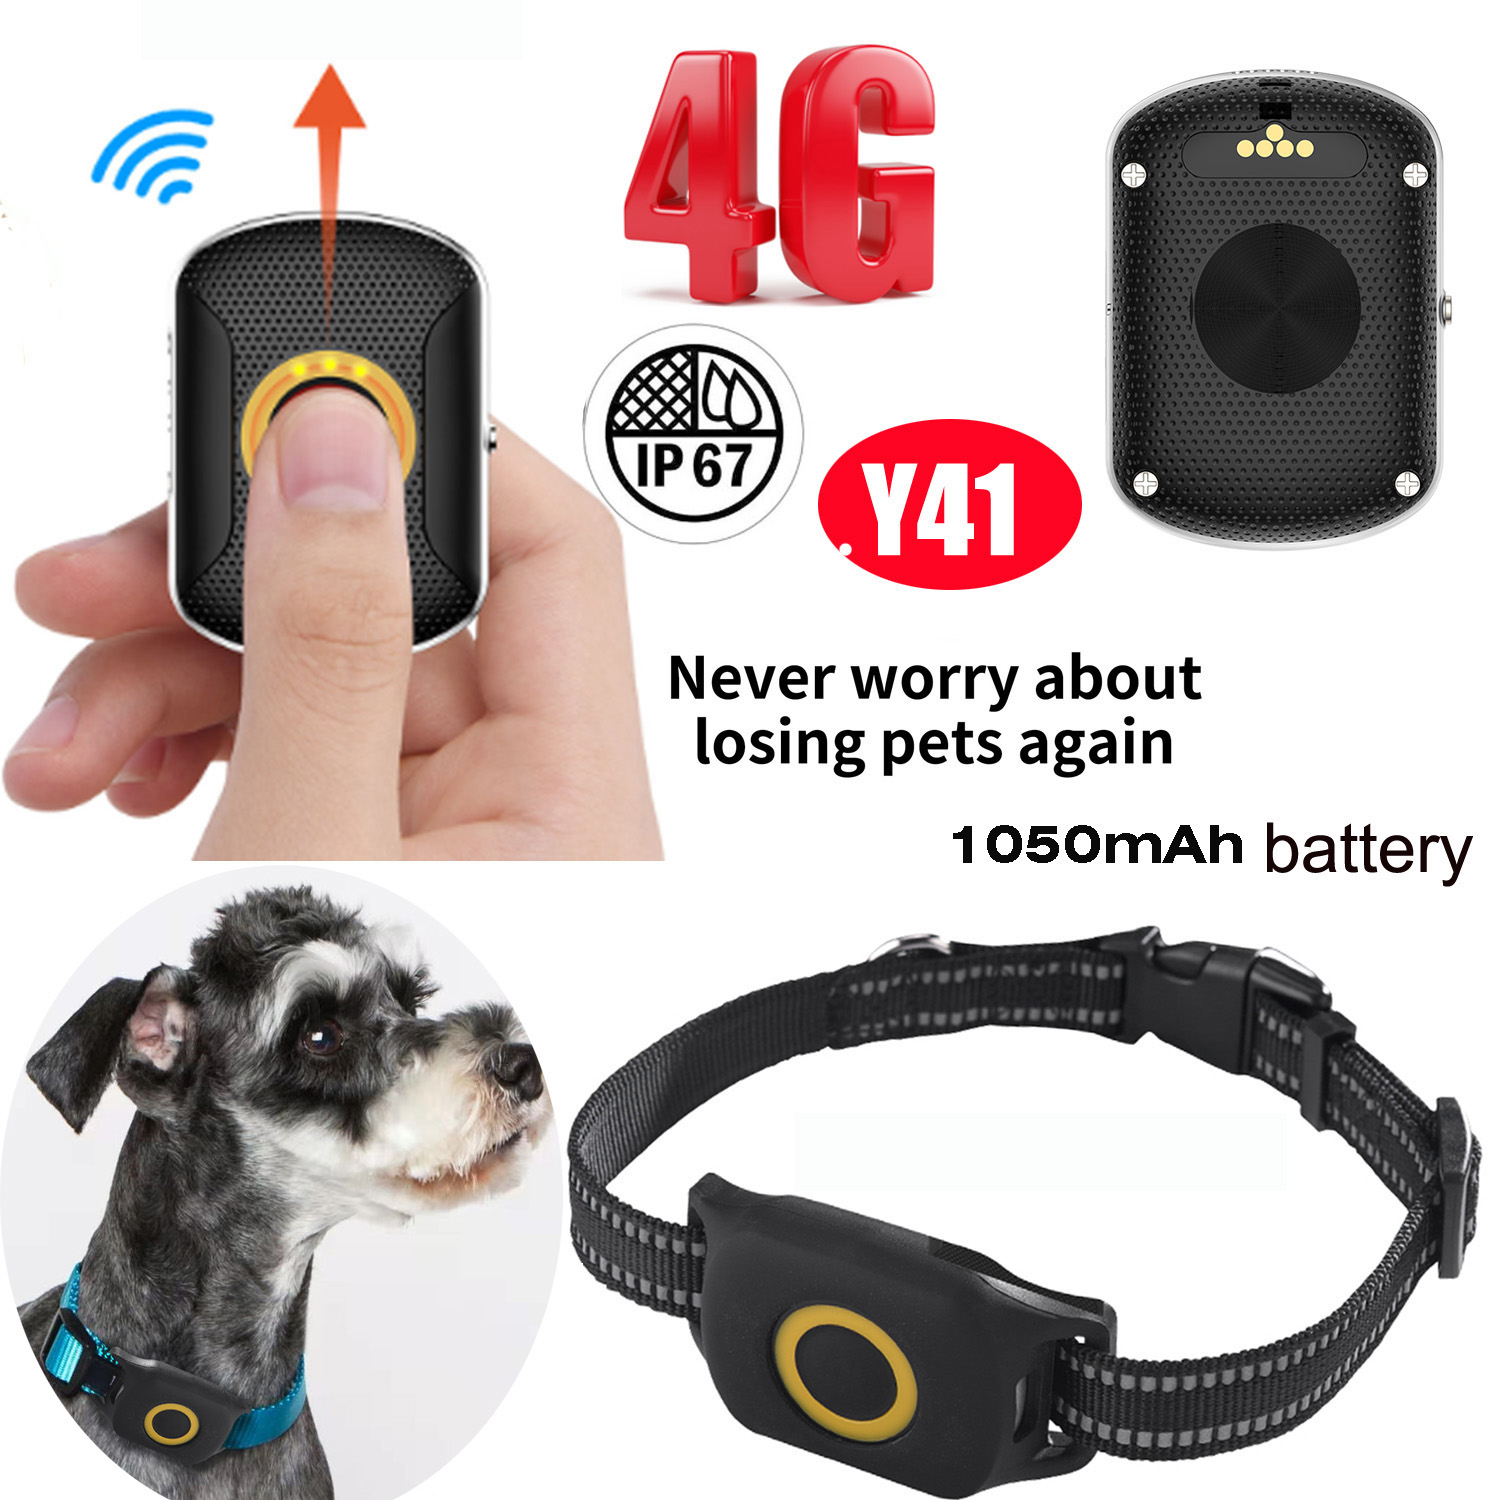 4G IP67 Waterproof security Tiny Pets GPS tracking device 